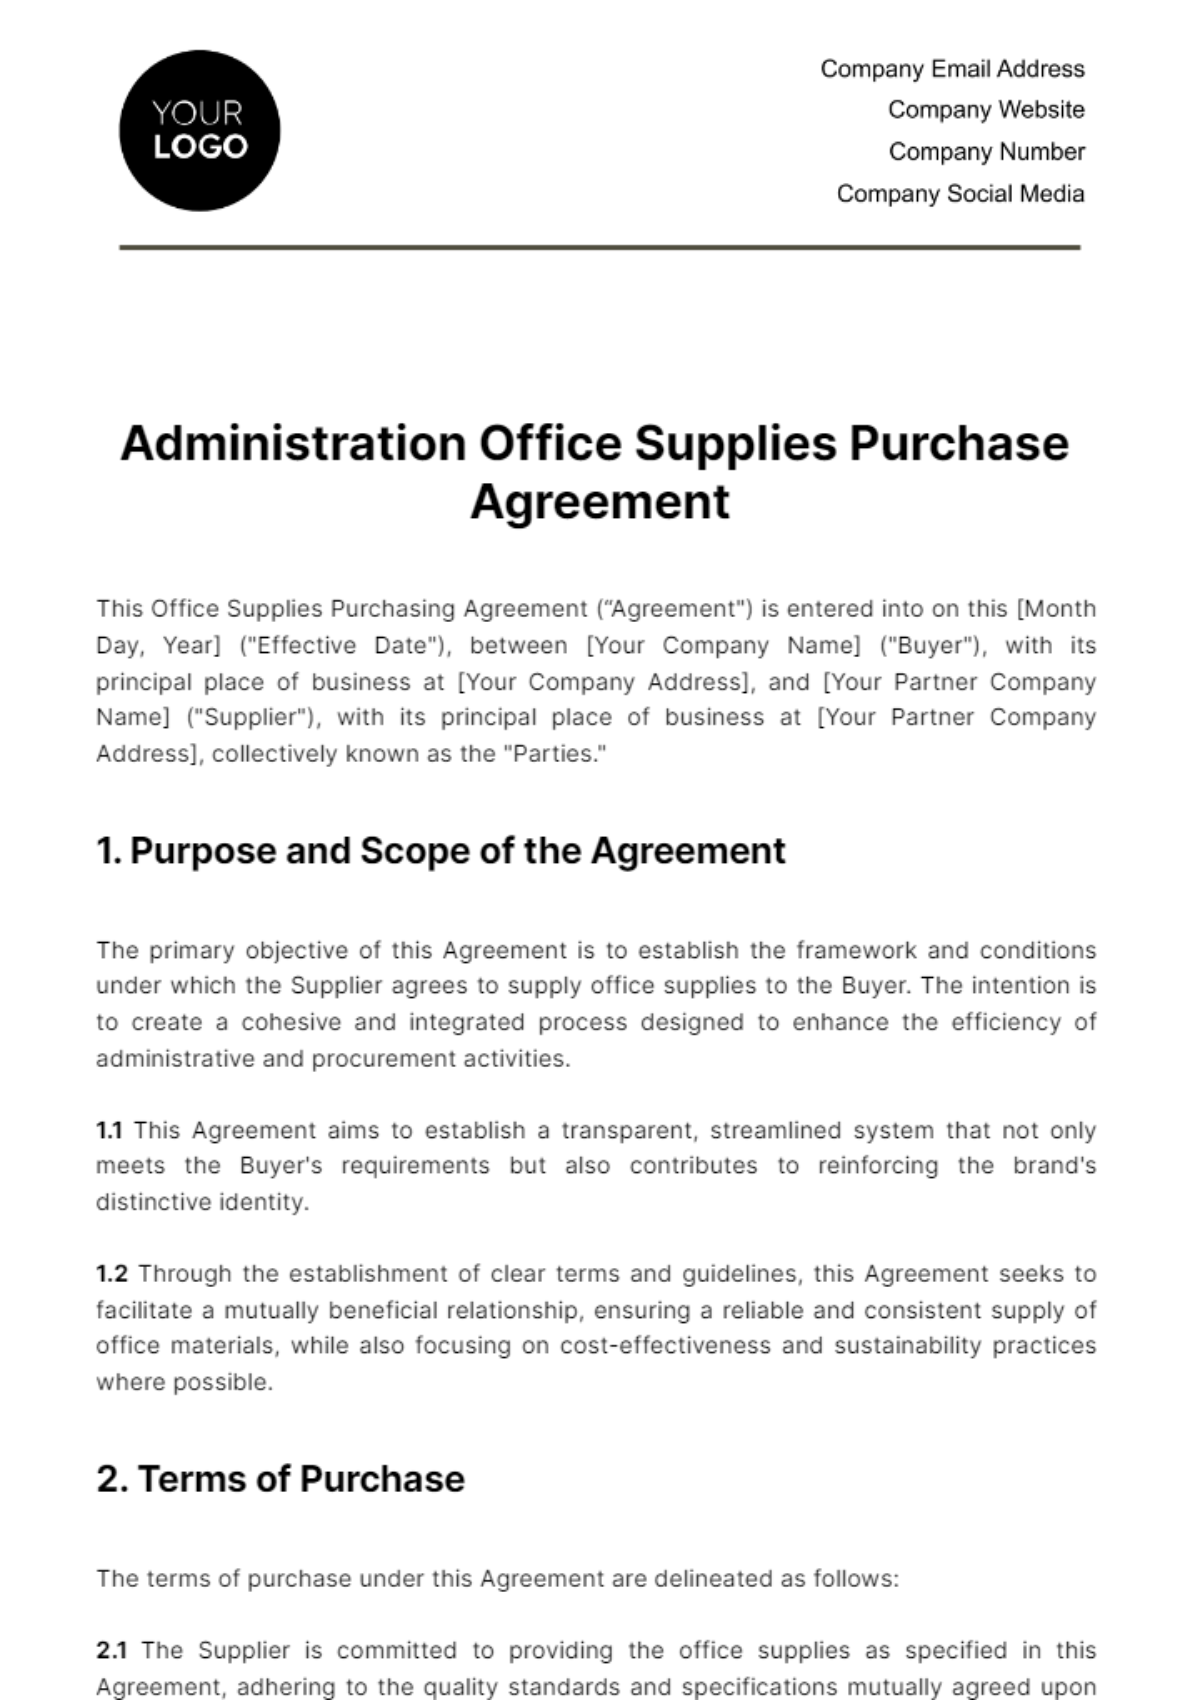 Administration Office Supplies Purchase Agreement Template